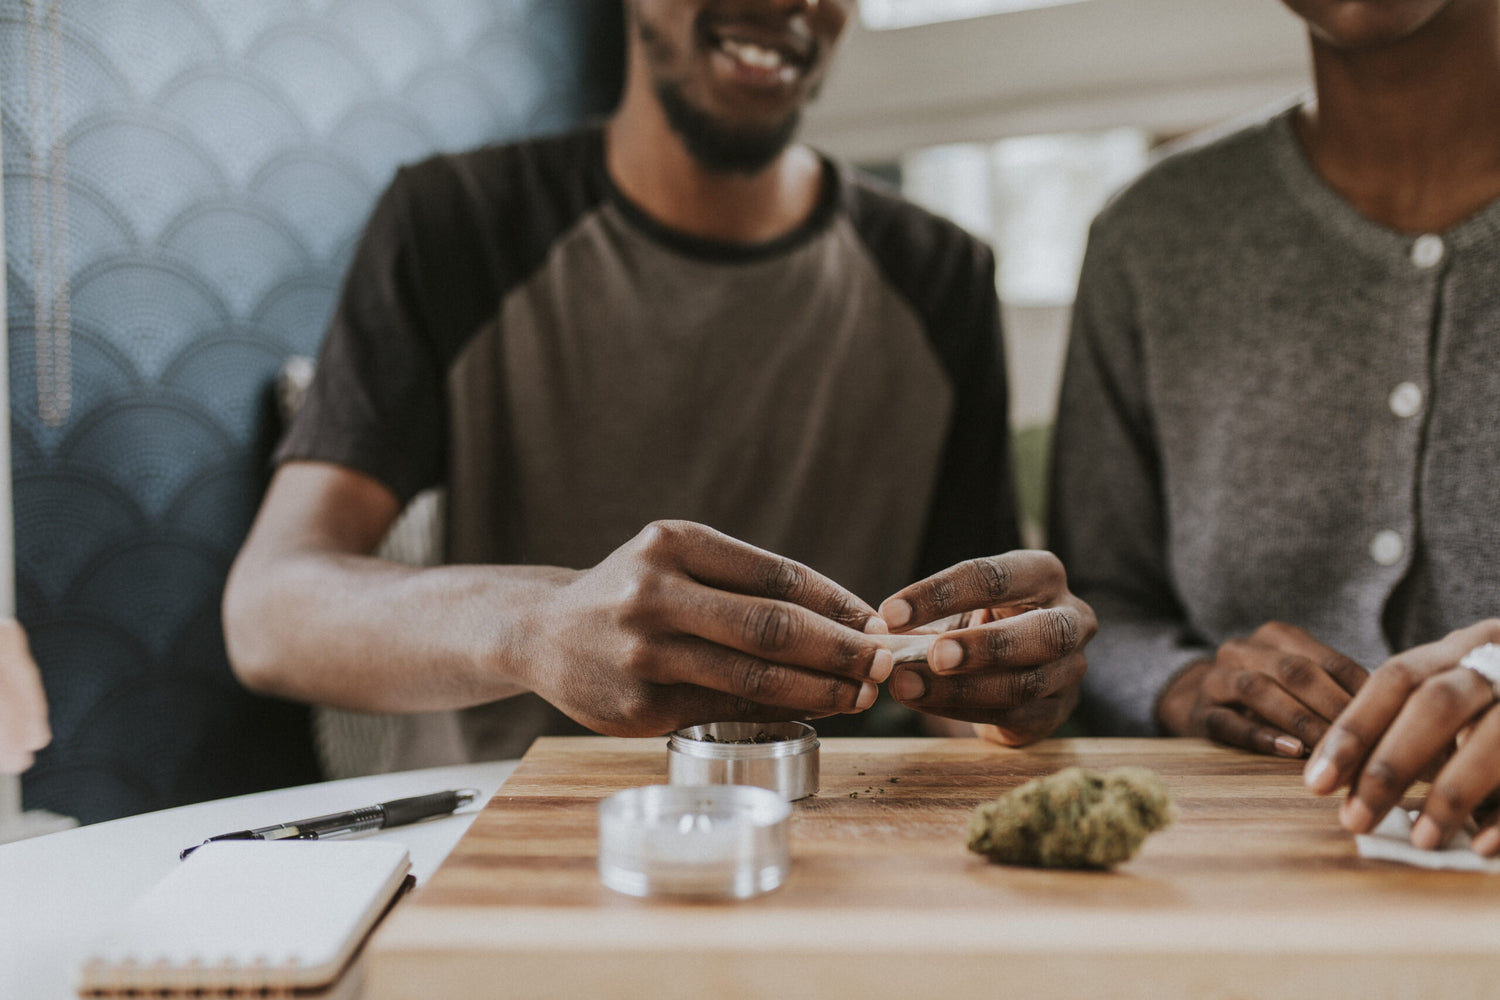 Nevada Adds Education Program To Prepare Students For Marijuana Lounges